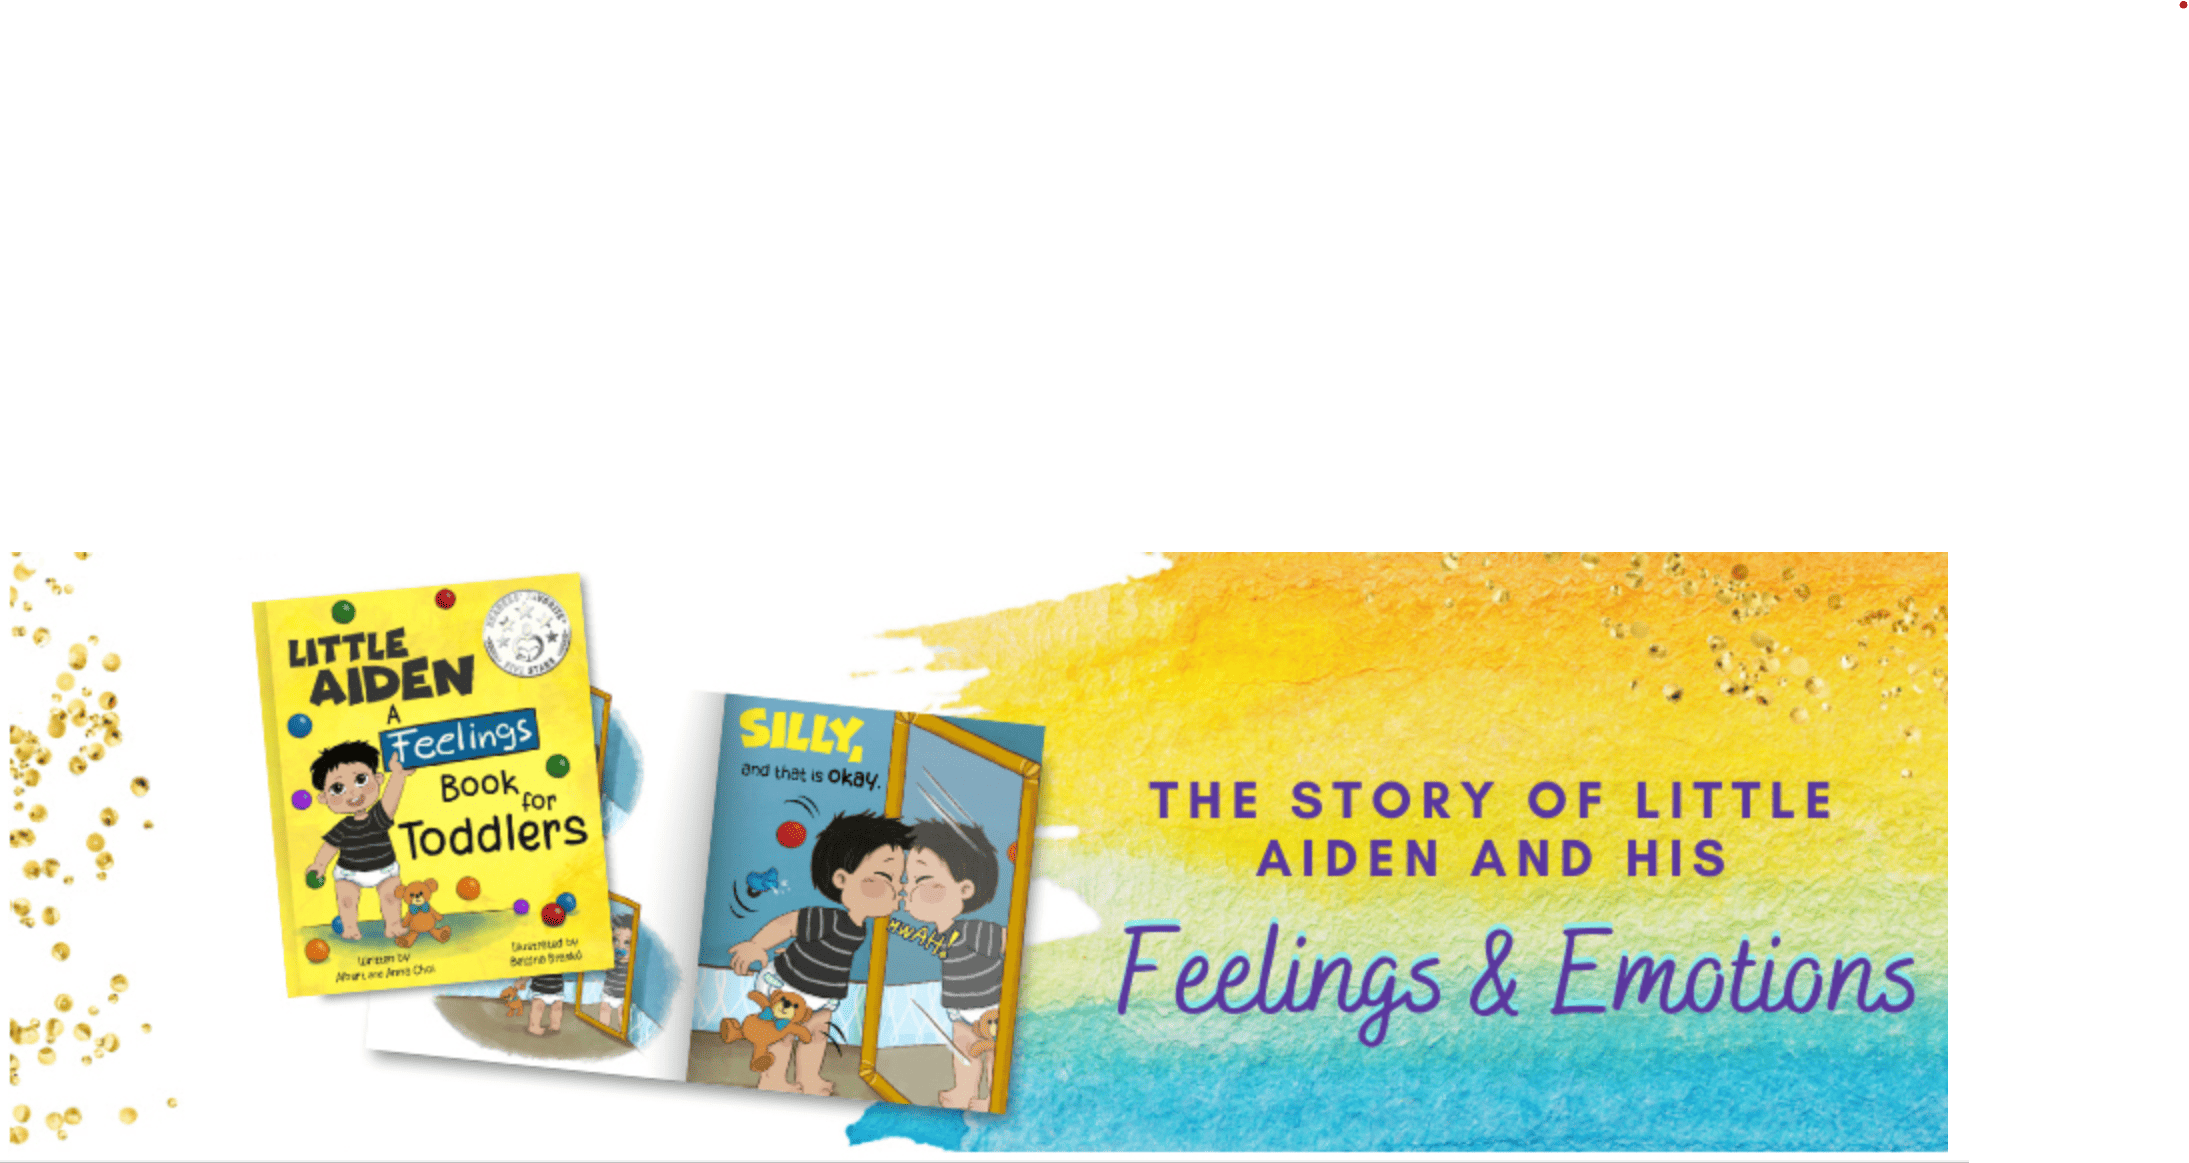 Little Aiden: A Feelings Book for Toddlers (Little Aiden Series #1) by Albert Choi | Children's Book Review